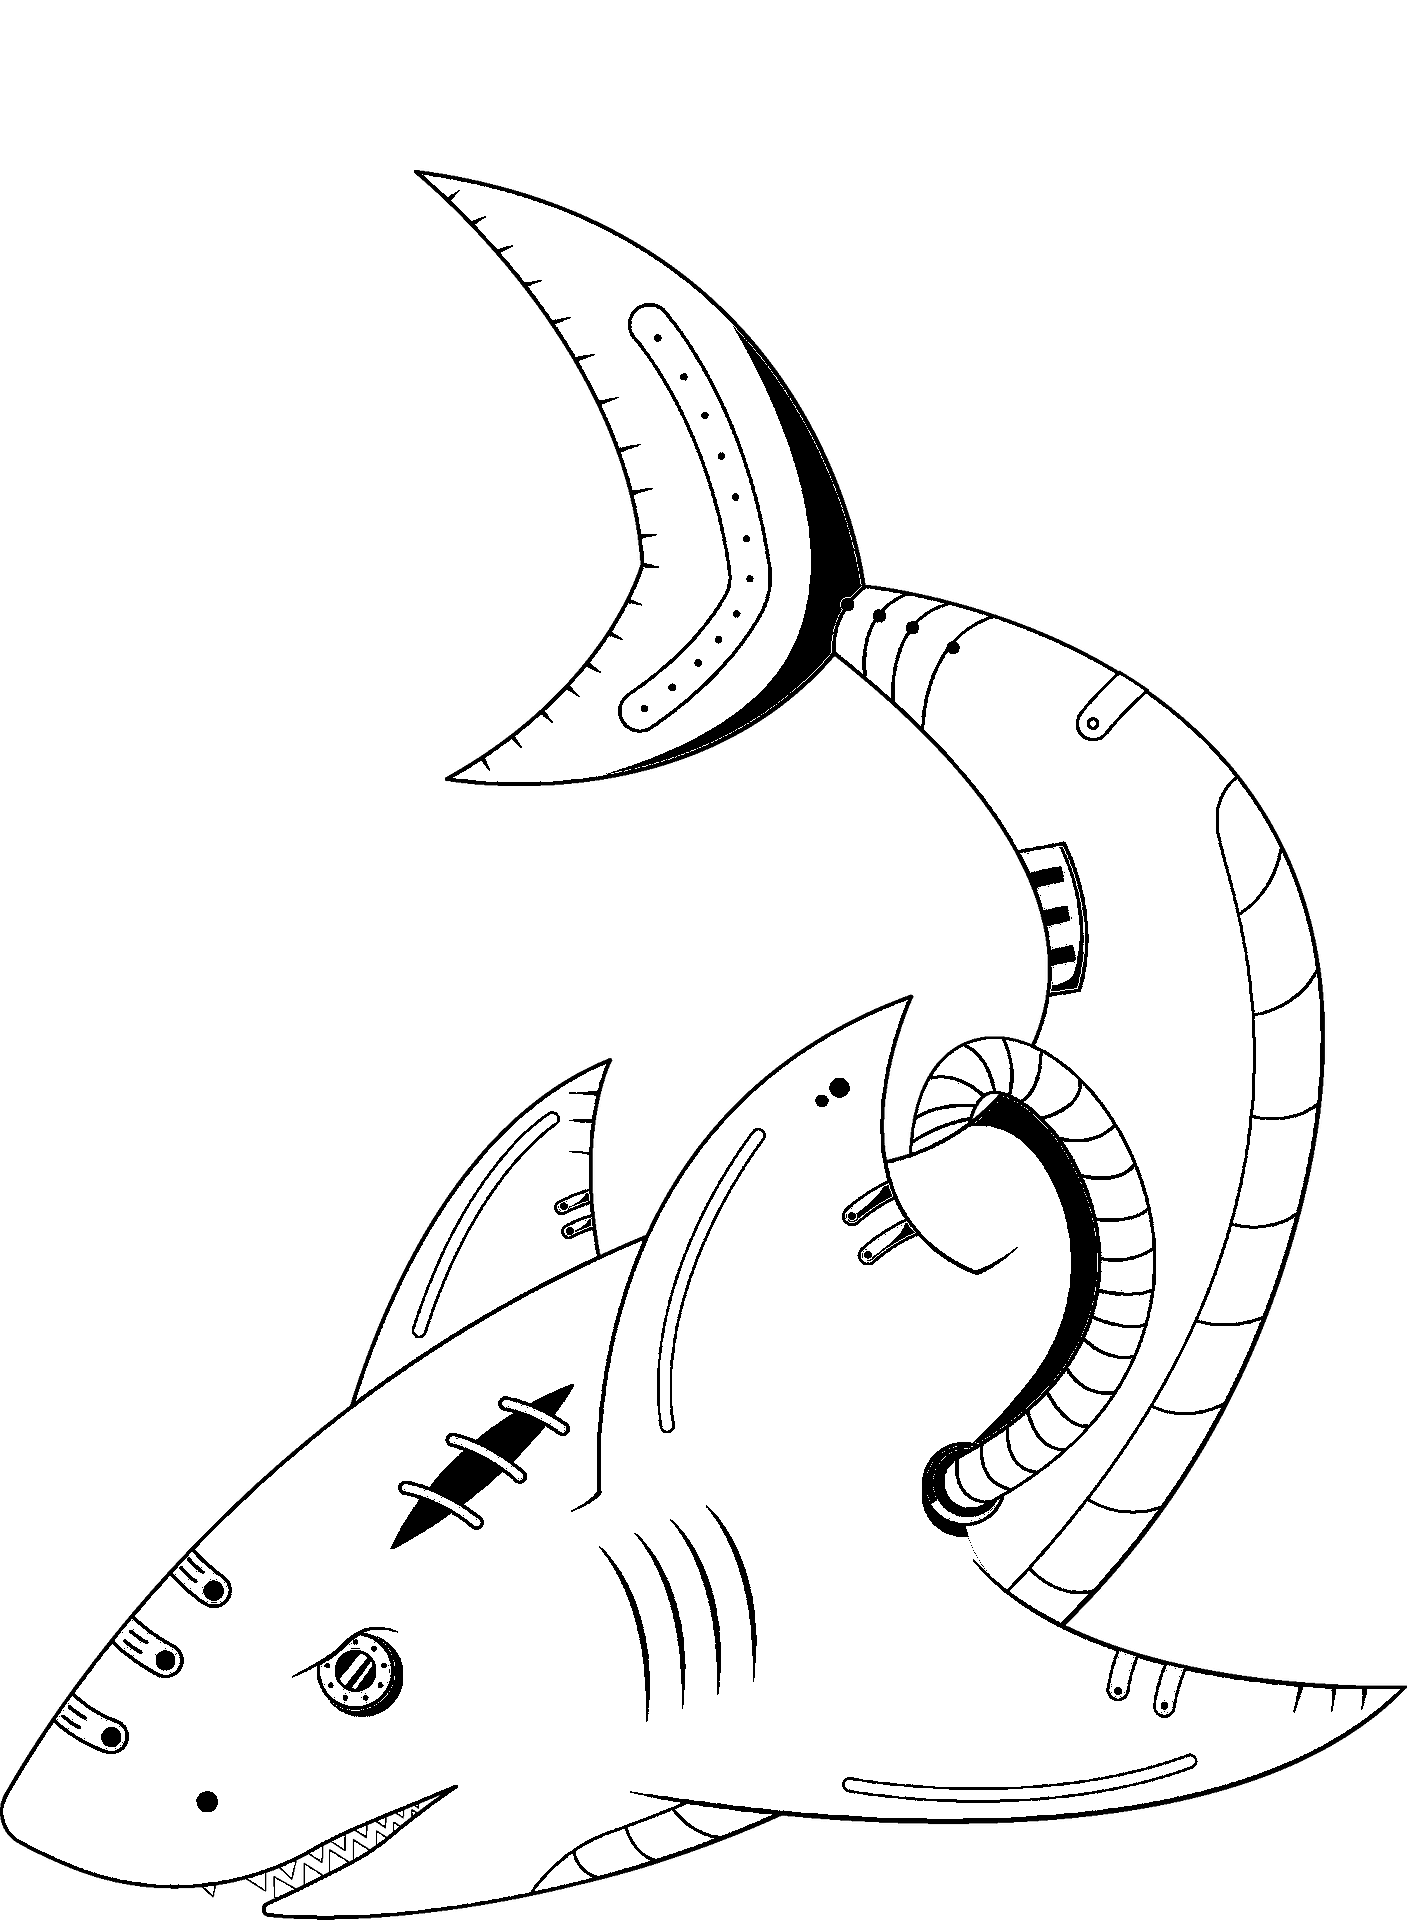 Coloring page of a shark